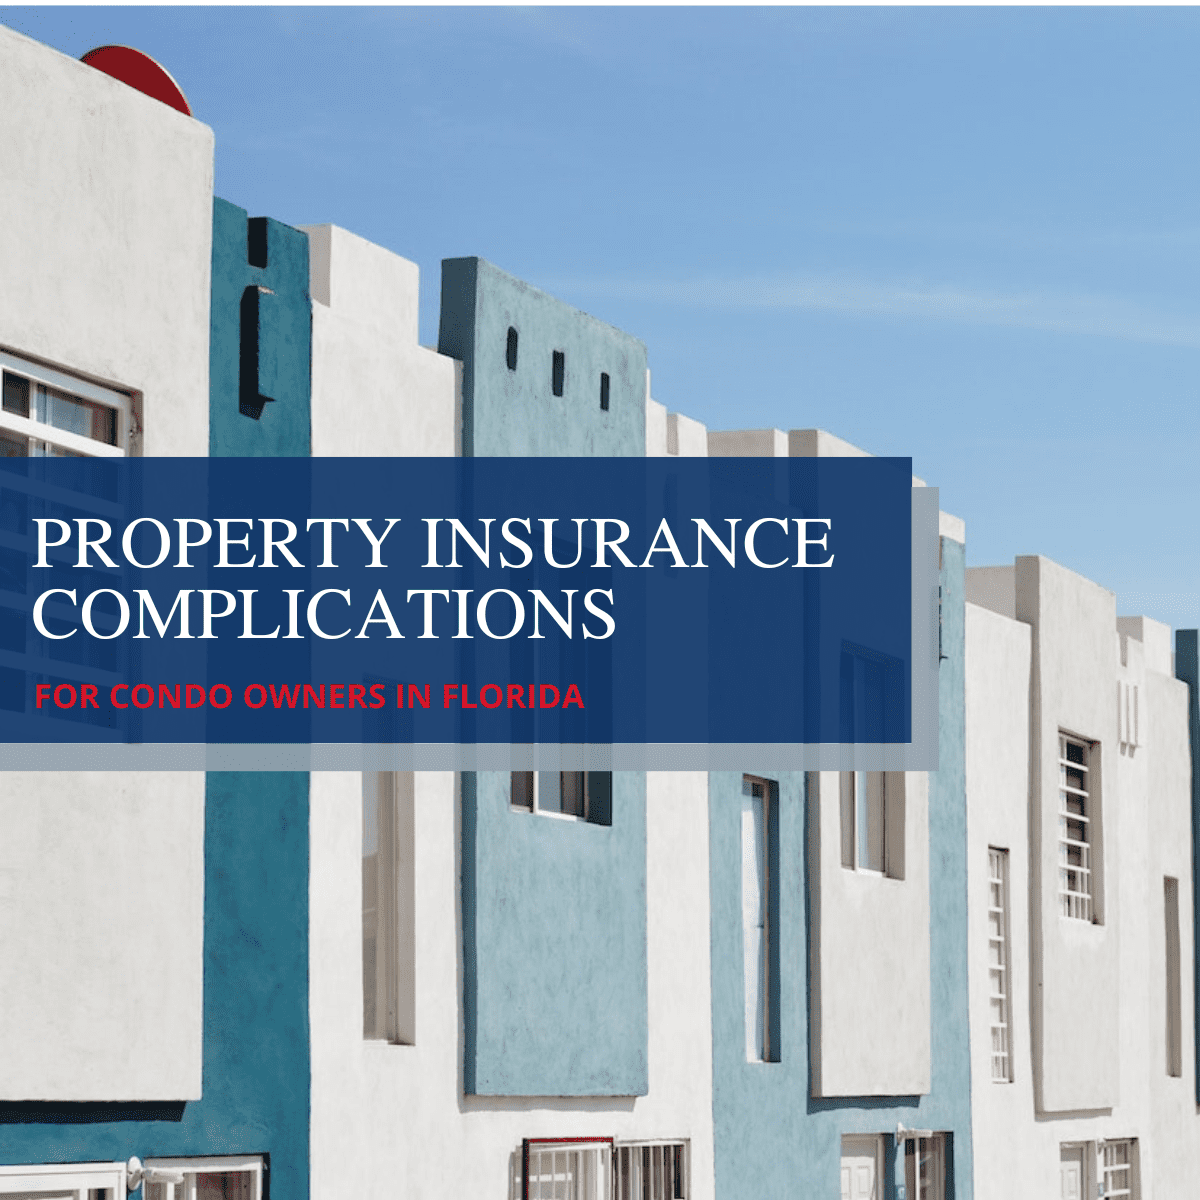 Condo Owners Face Property Insurance Complications in Florida